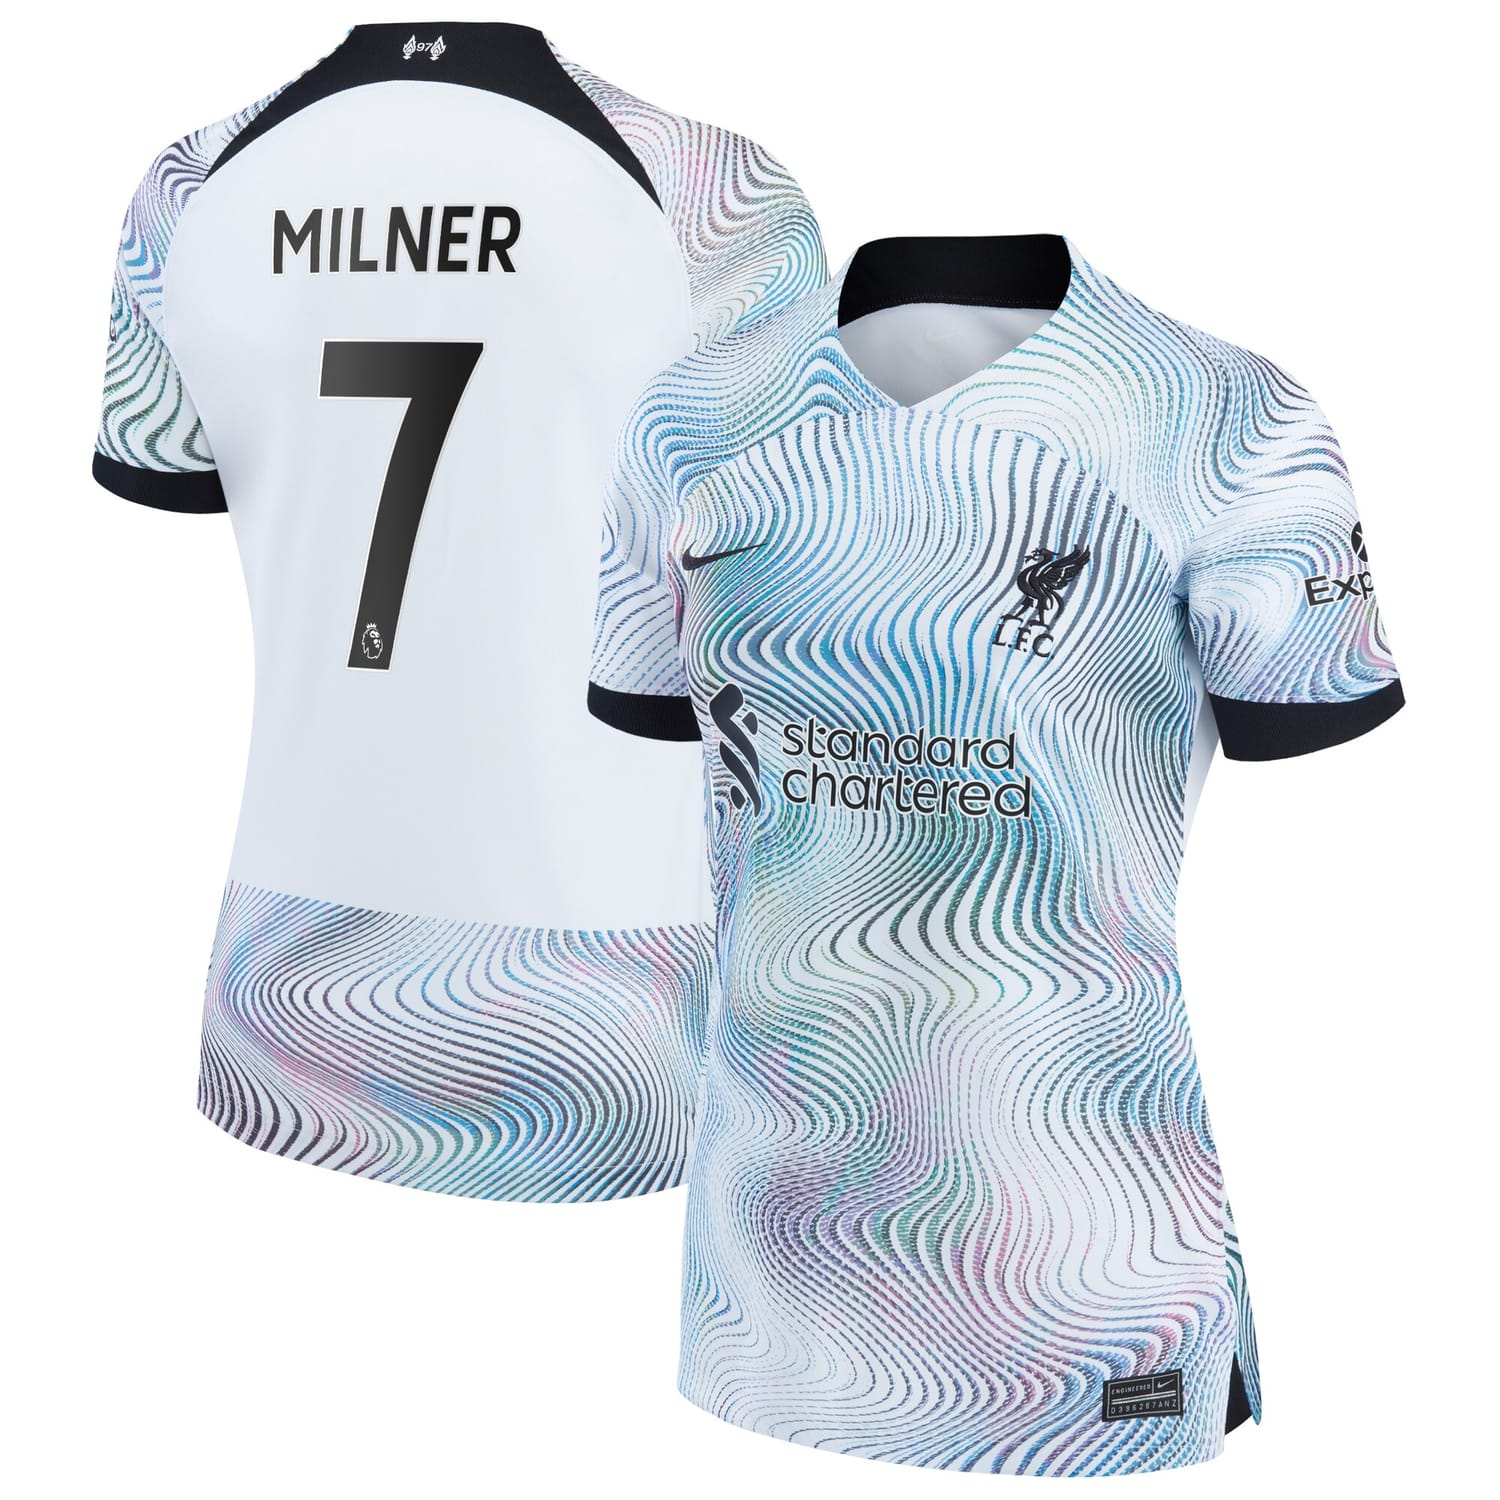 Premier League Liverpool Away Jersey Shirt 2022-23 player Milner 7 printing for Women